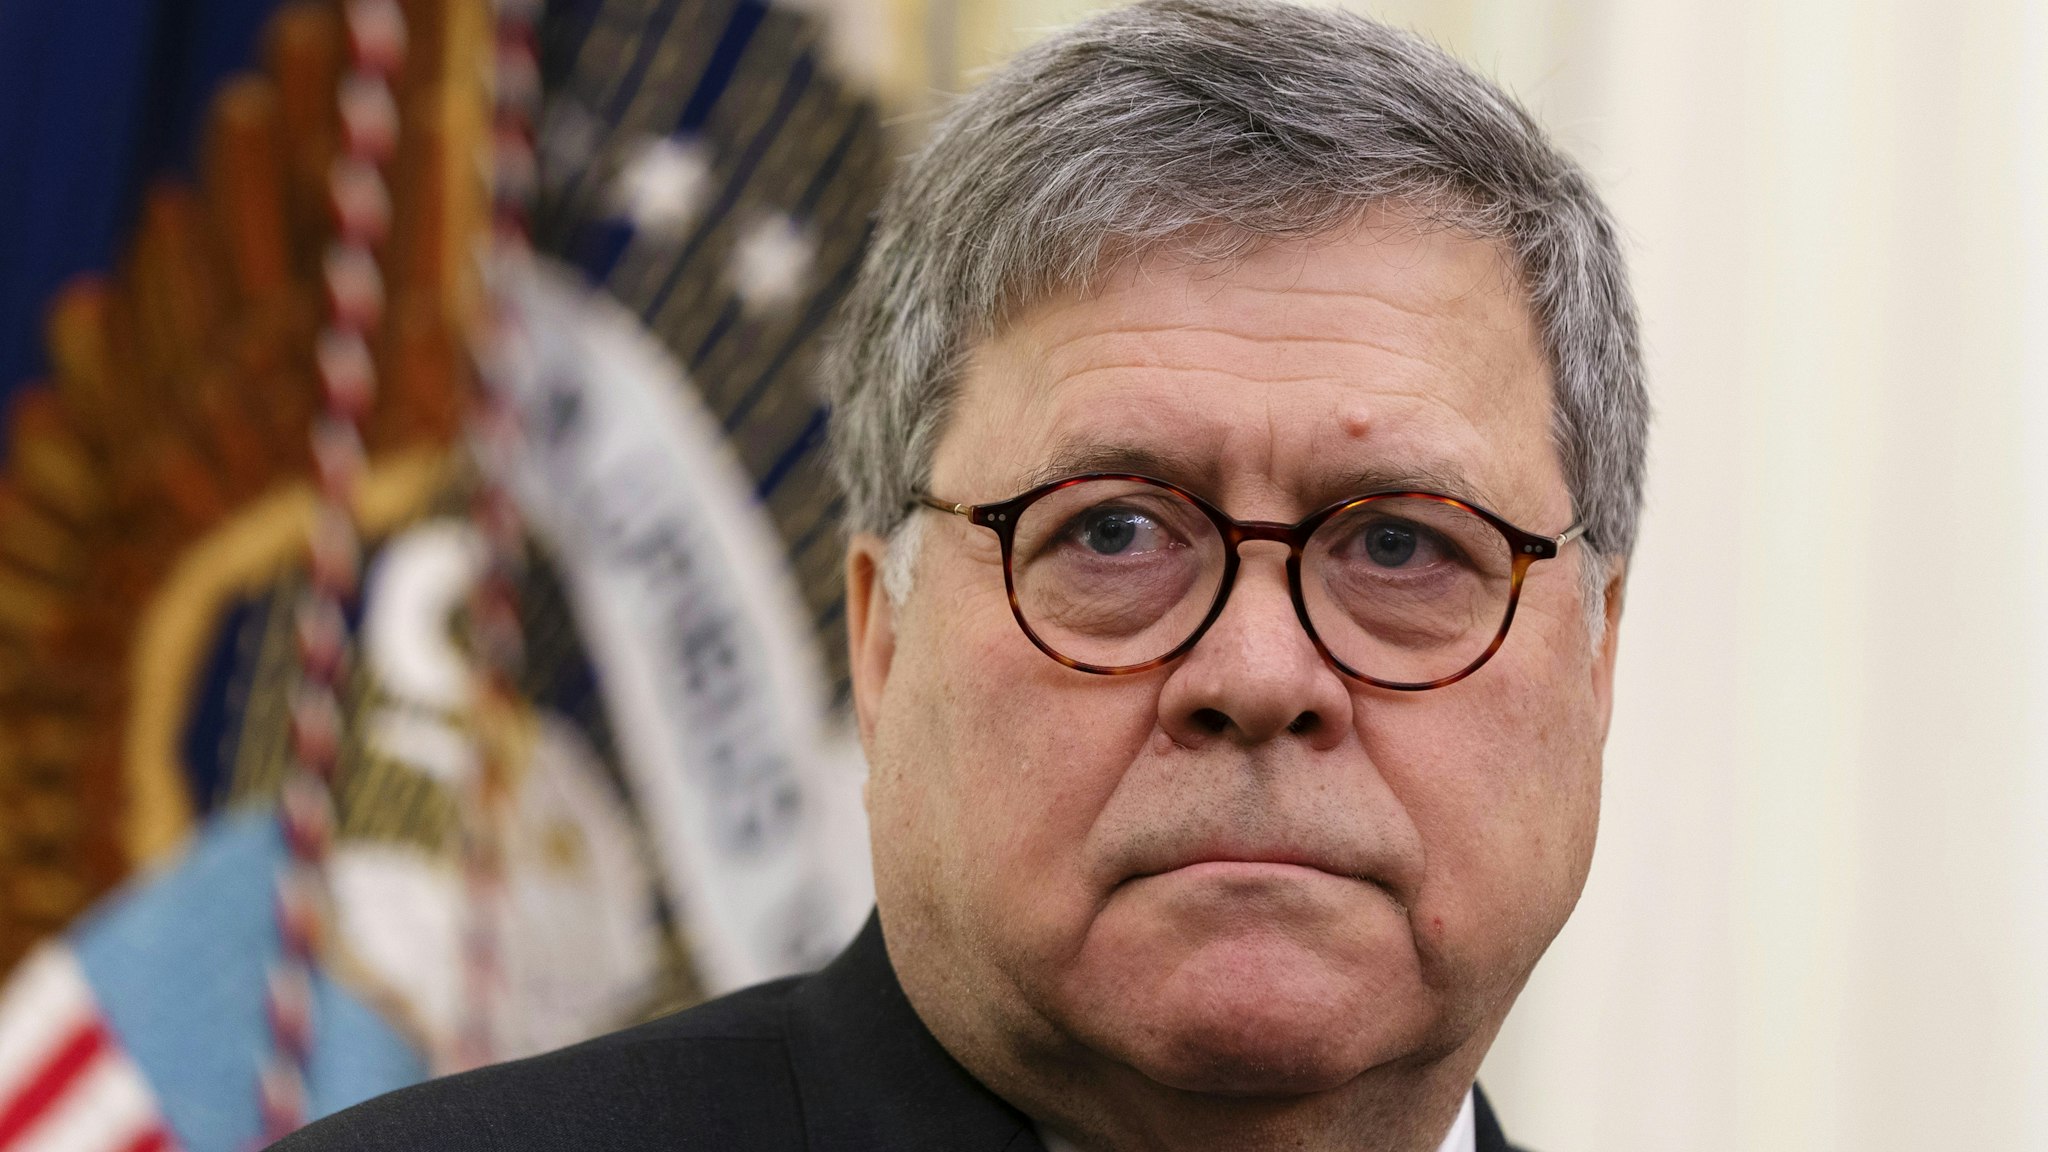 William Barr, U.S. attorney general, watches while U.S. President Donald Trump, not pictured, signs an executive order establishing a task force on missing and murdered American Indians and Alaska Natives in the Oval Office of the White House in Washington, D.C., U.S., on Tuesday, Nov. 26, 2019. The task force is meant to engage with tribal communities on the scope of the issue and to develop protocols to apply to new and unsolved cases.